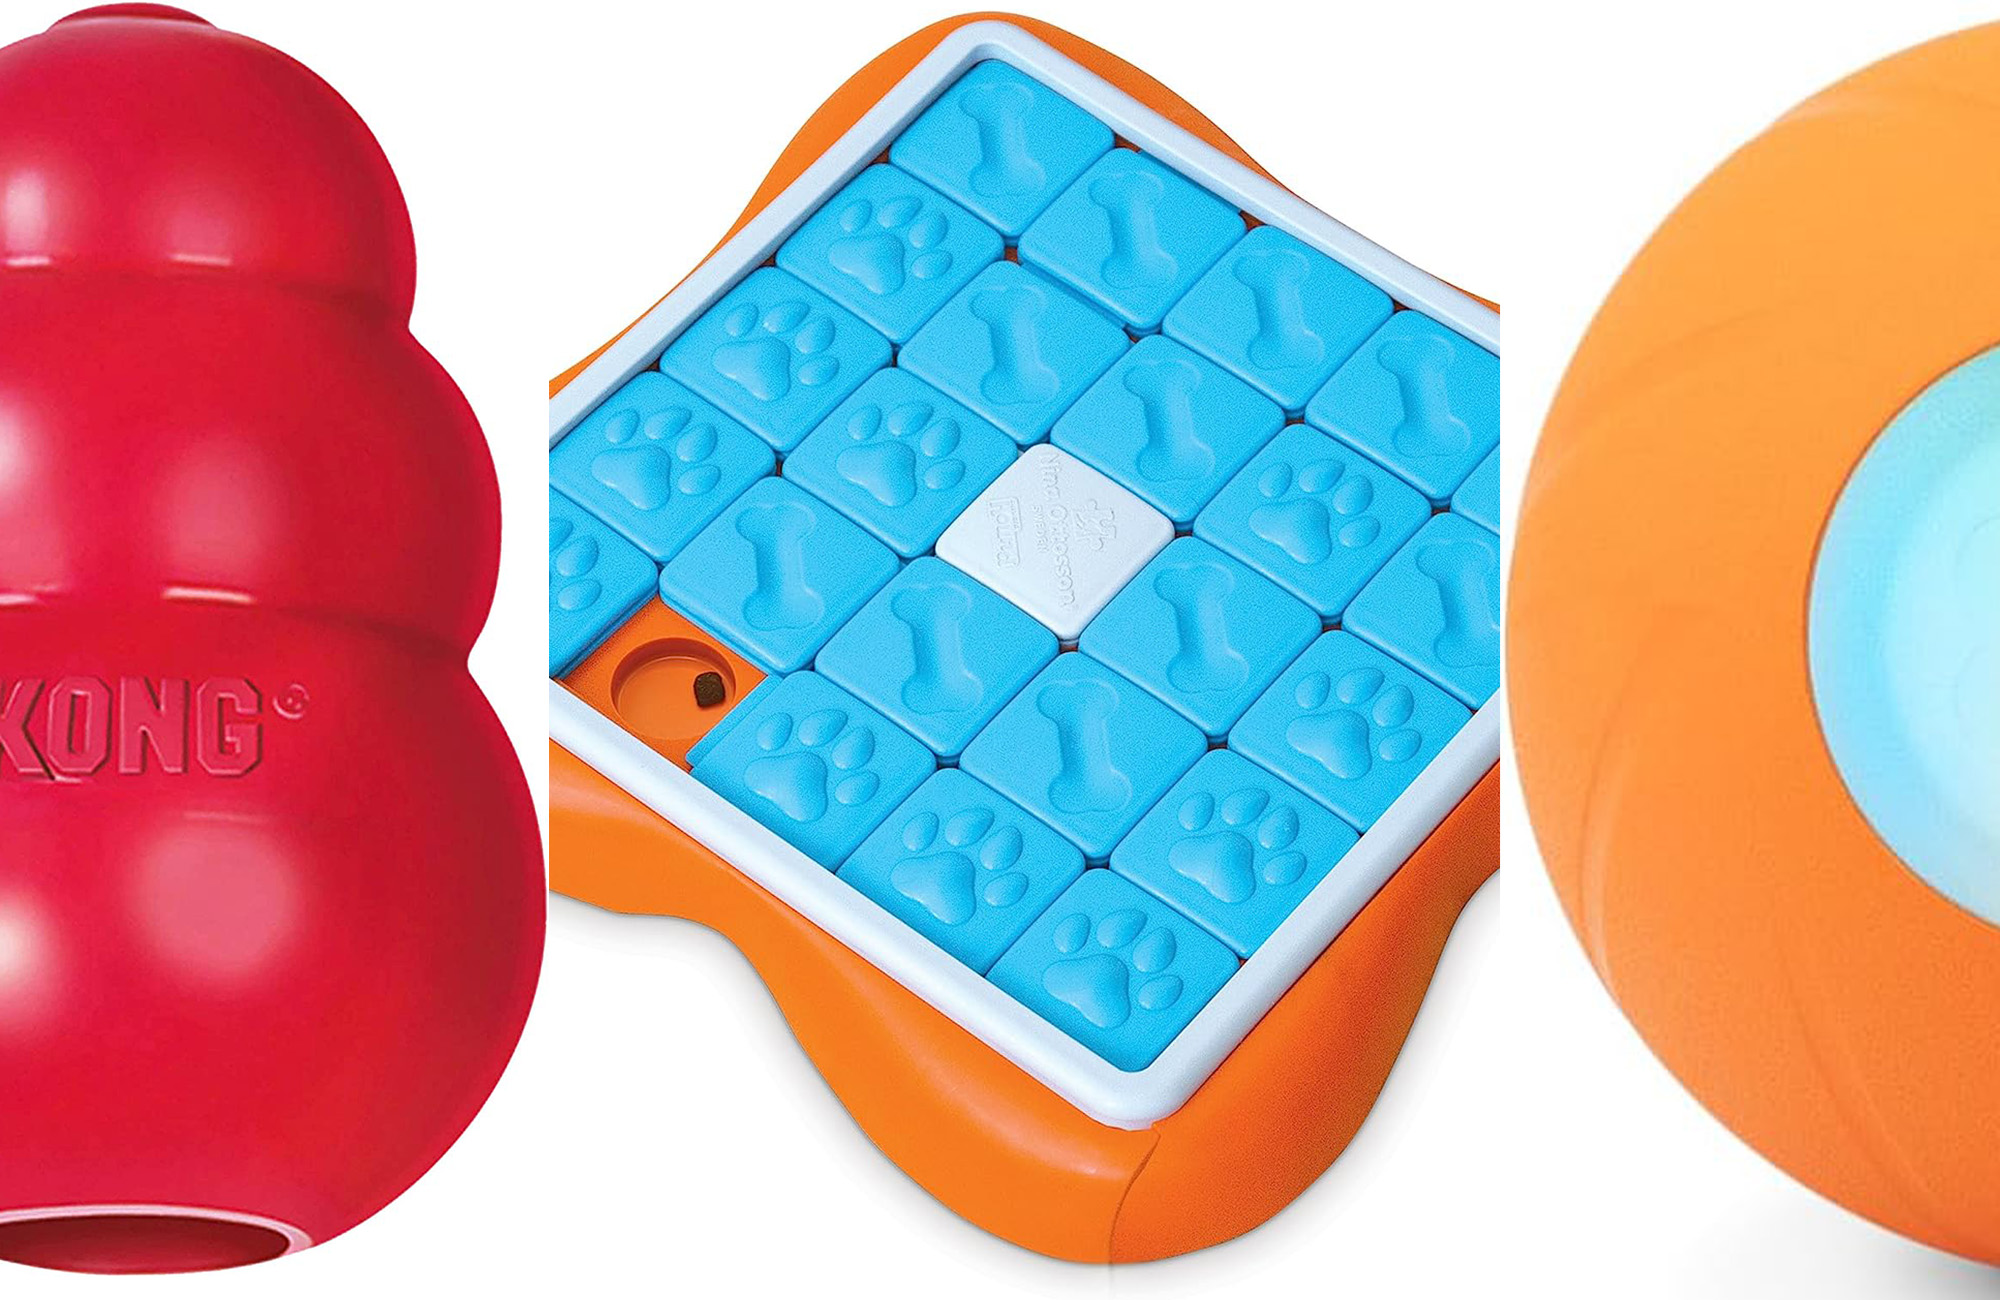 Orange Dog Treat Ball Toy, Interactive Dog Iq Puzzle Toy 3 Holes Food  Dispensing Pet Toy For Small Medium Dogs Chasing Chewing Training